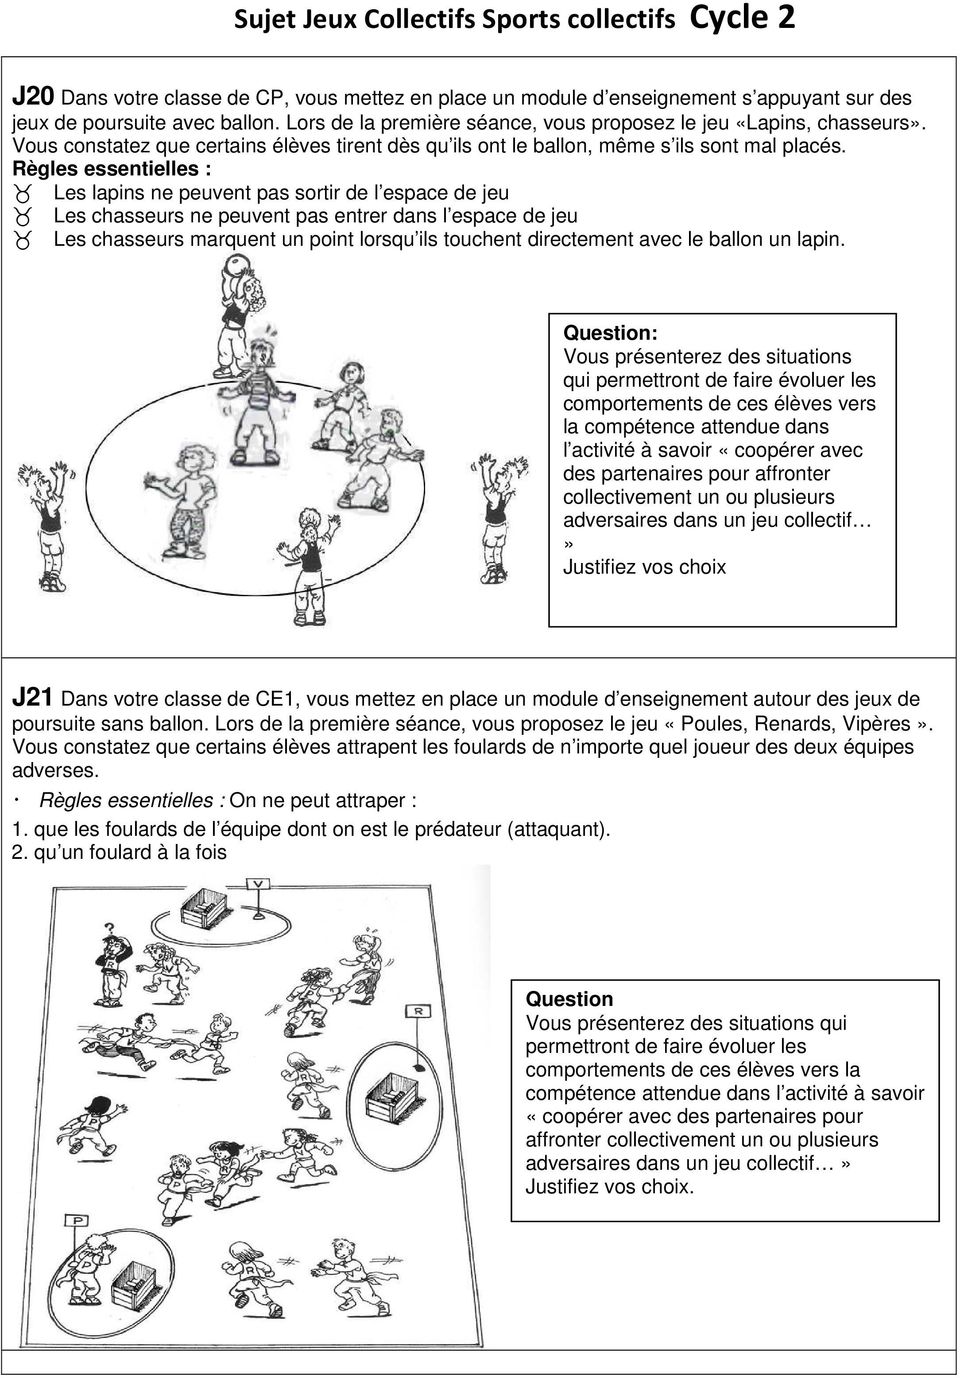 Sujet Jeux Collectifs Sports collectifs Cycle 1 - PDF Free Download